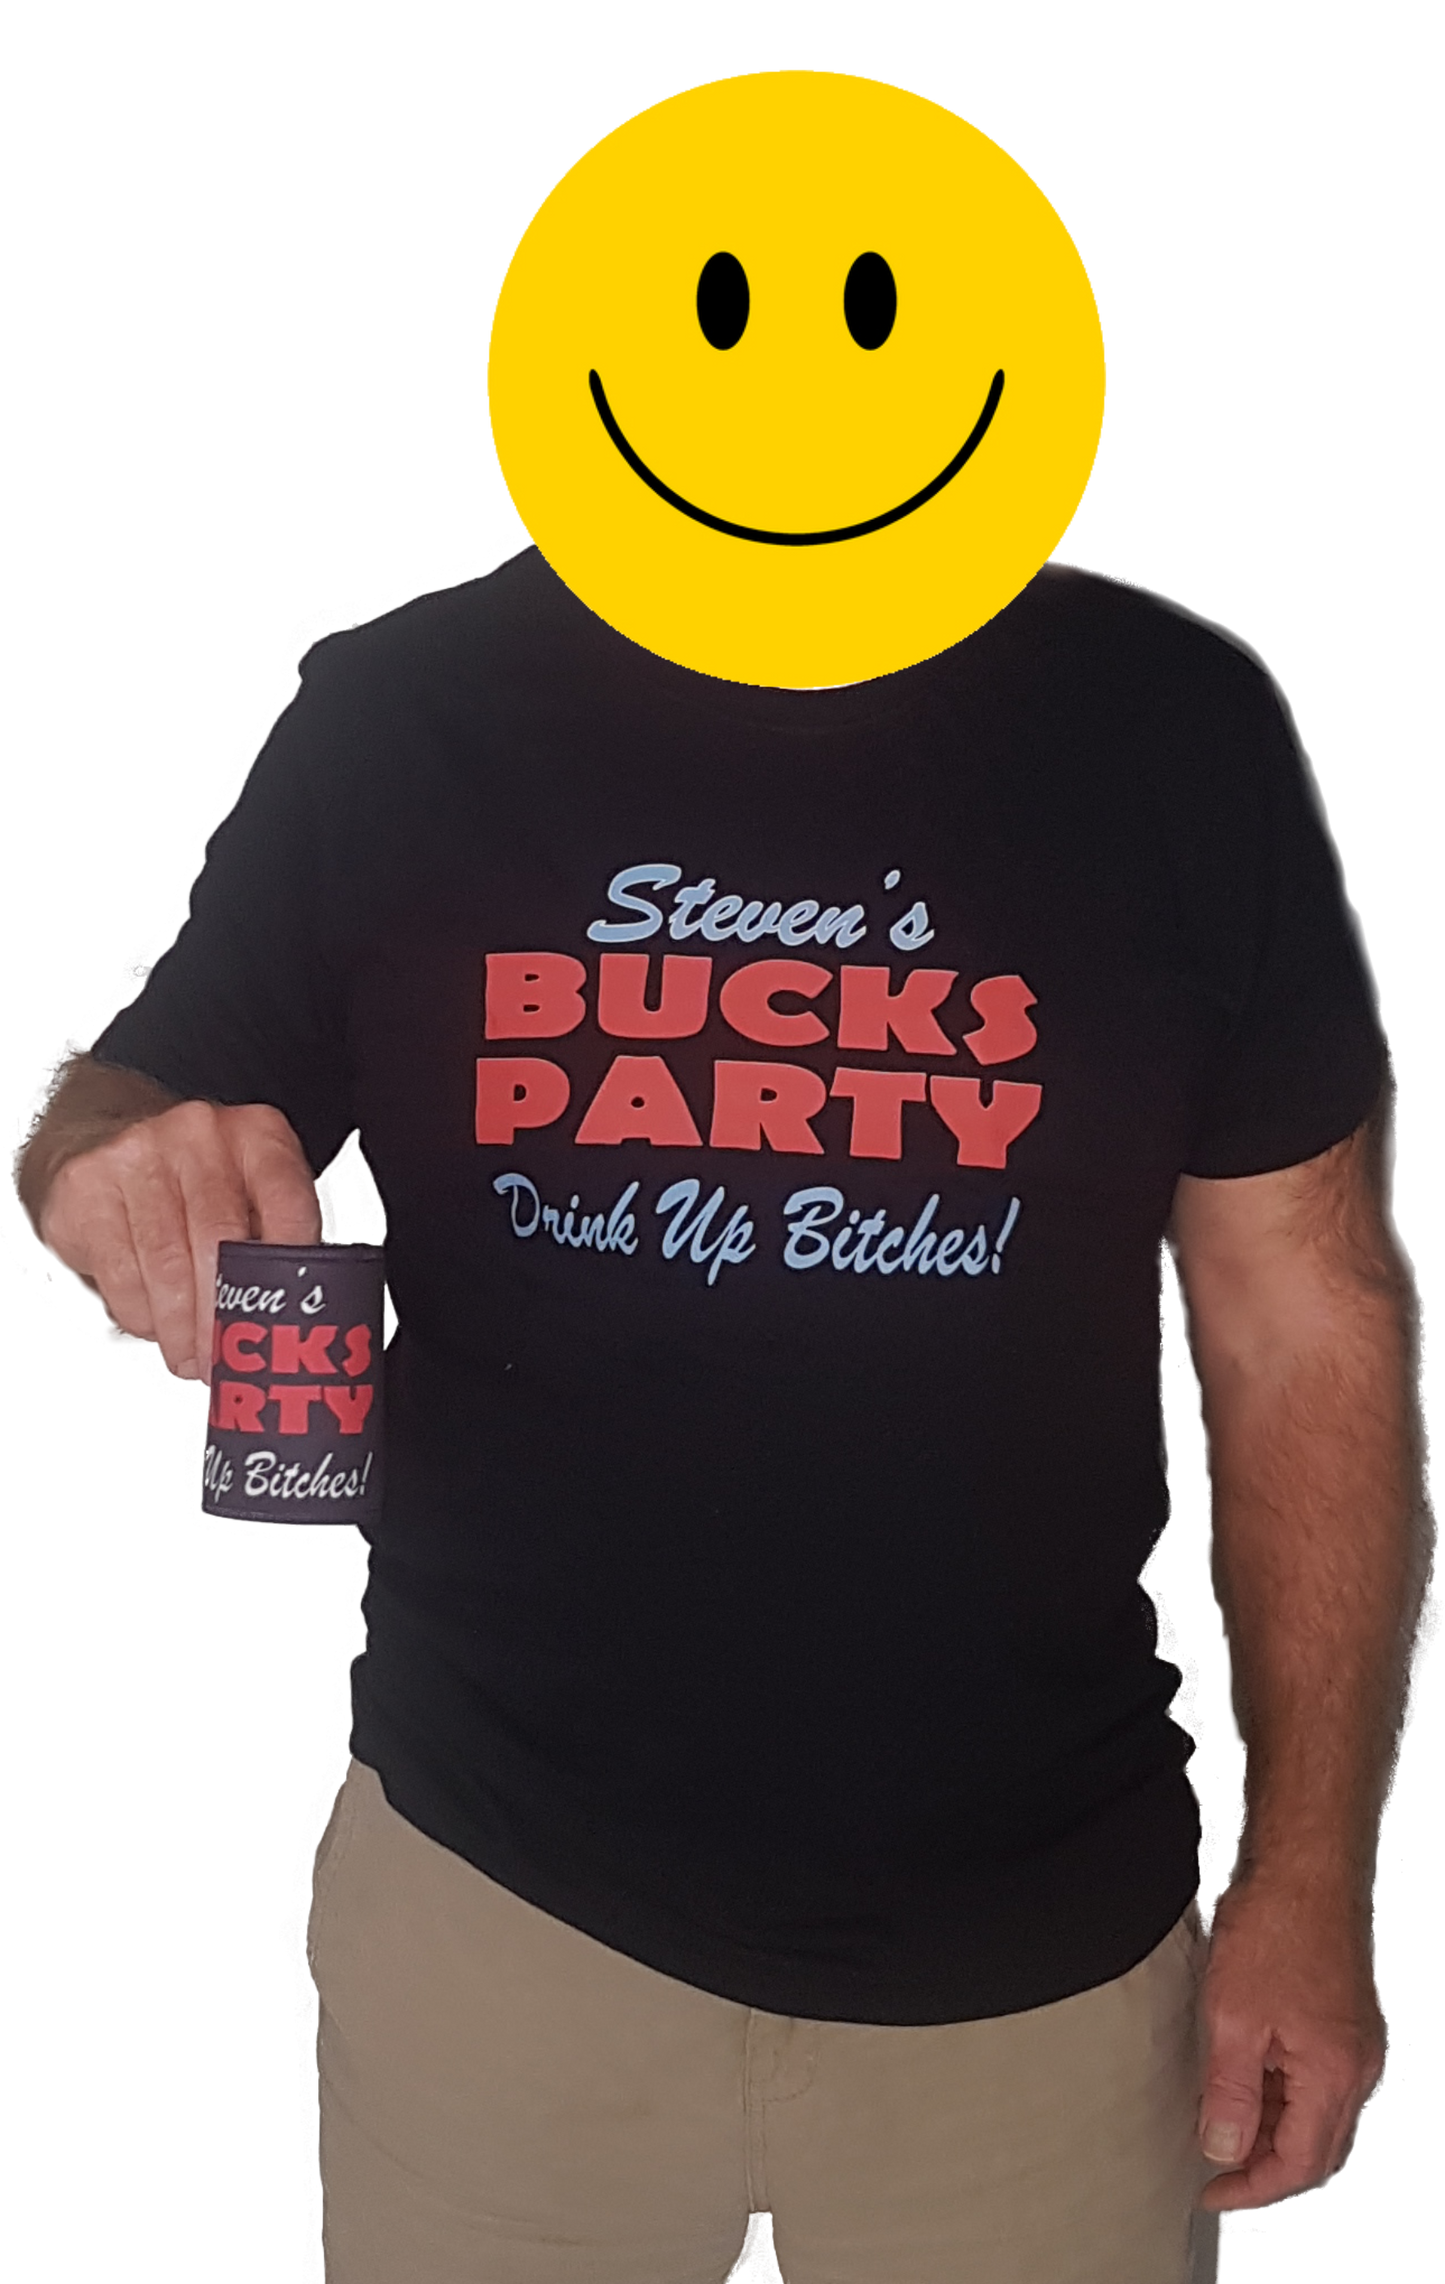 Bucks party package